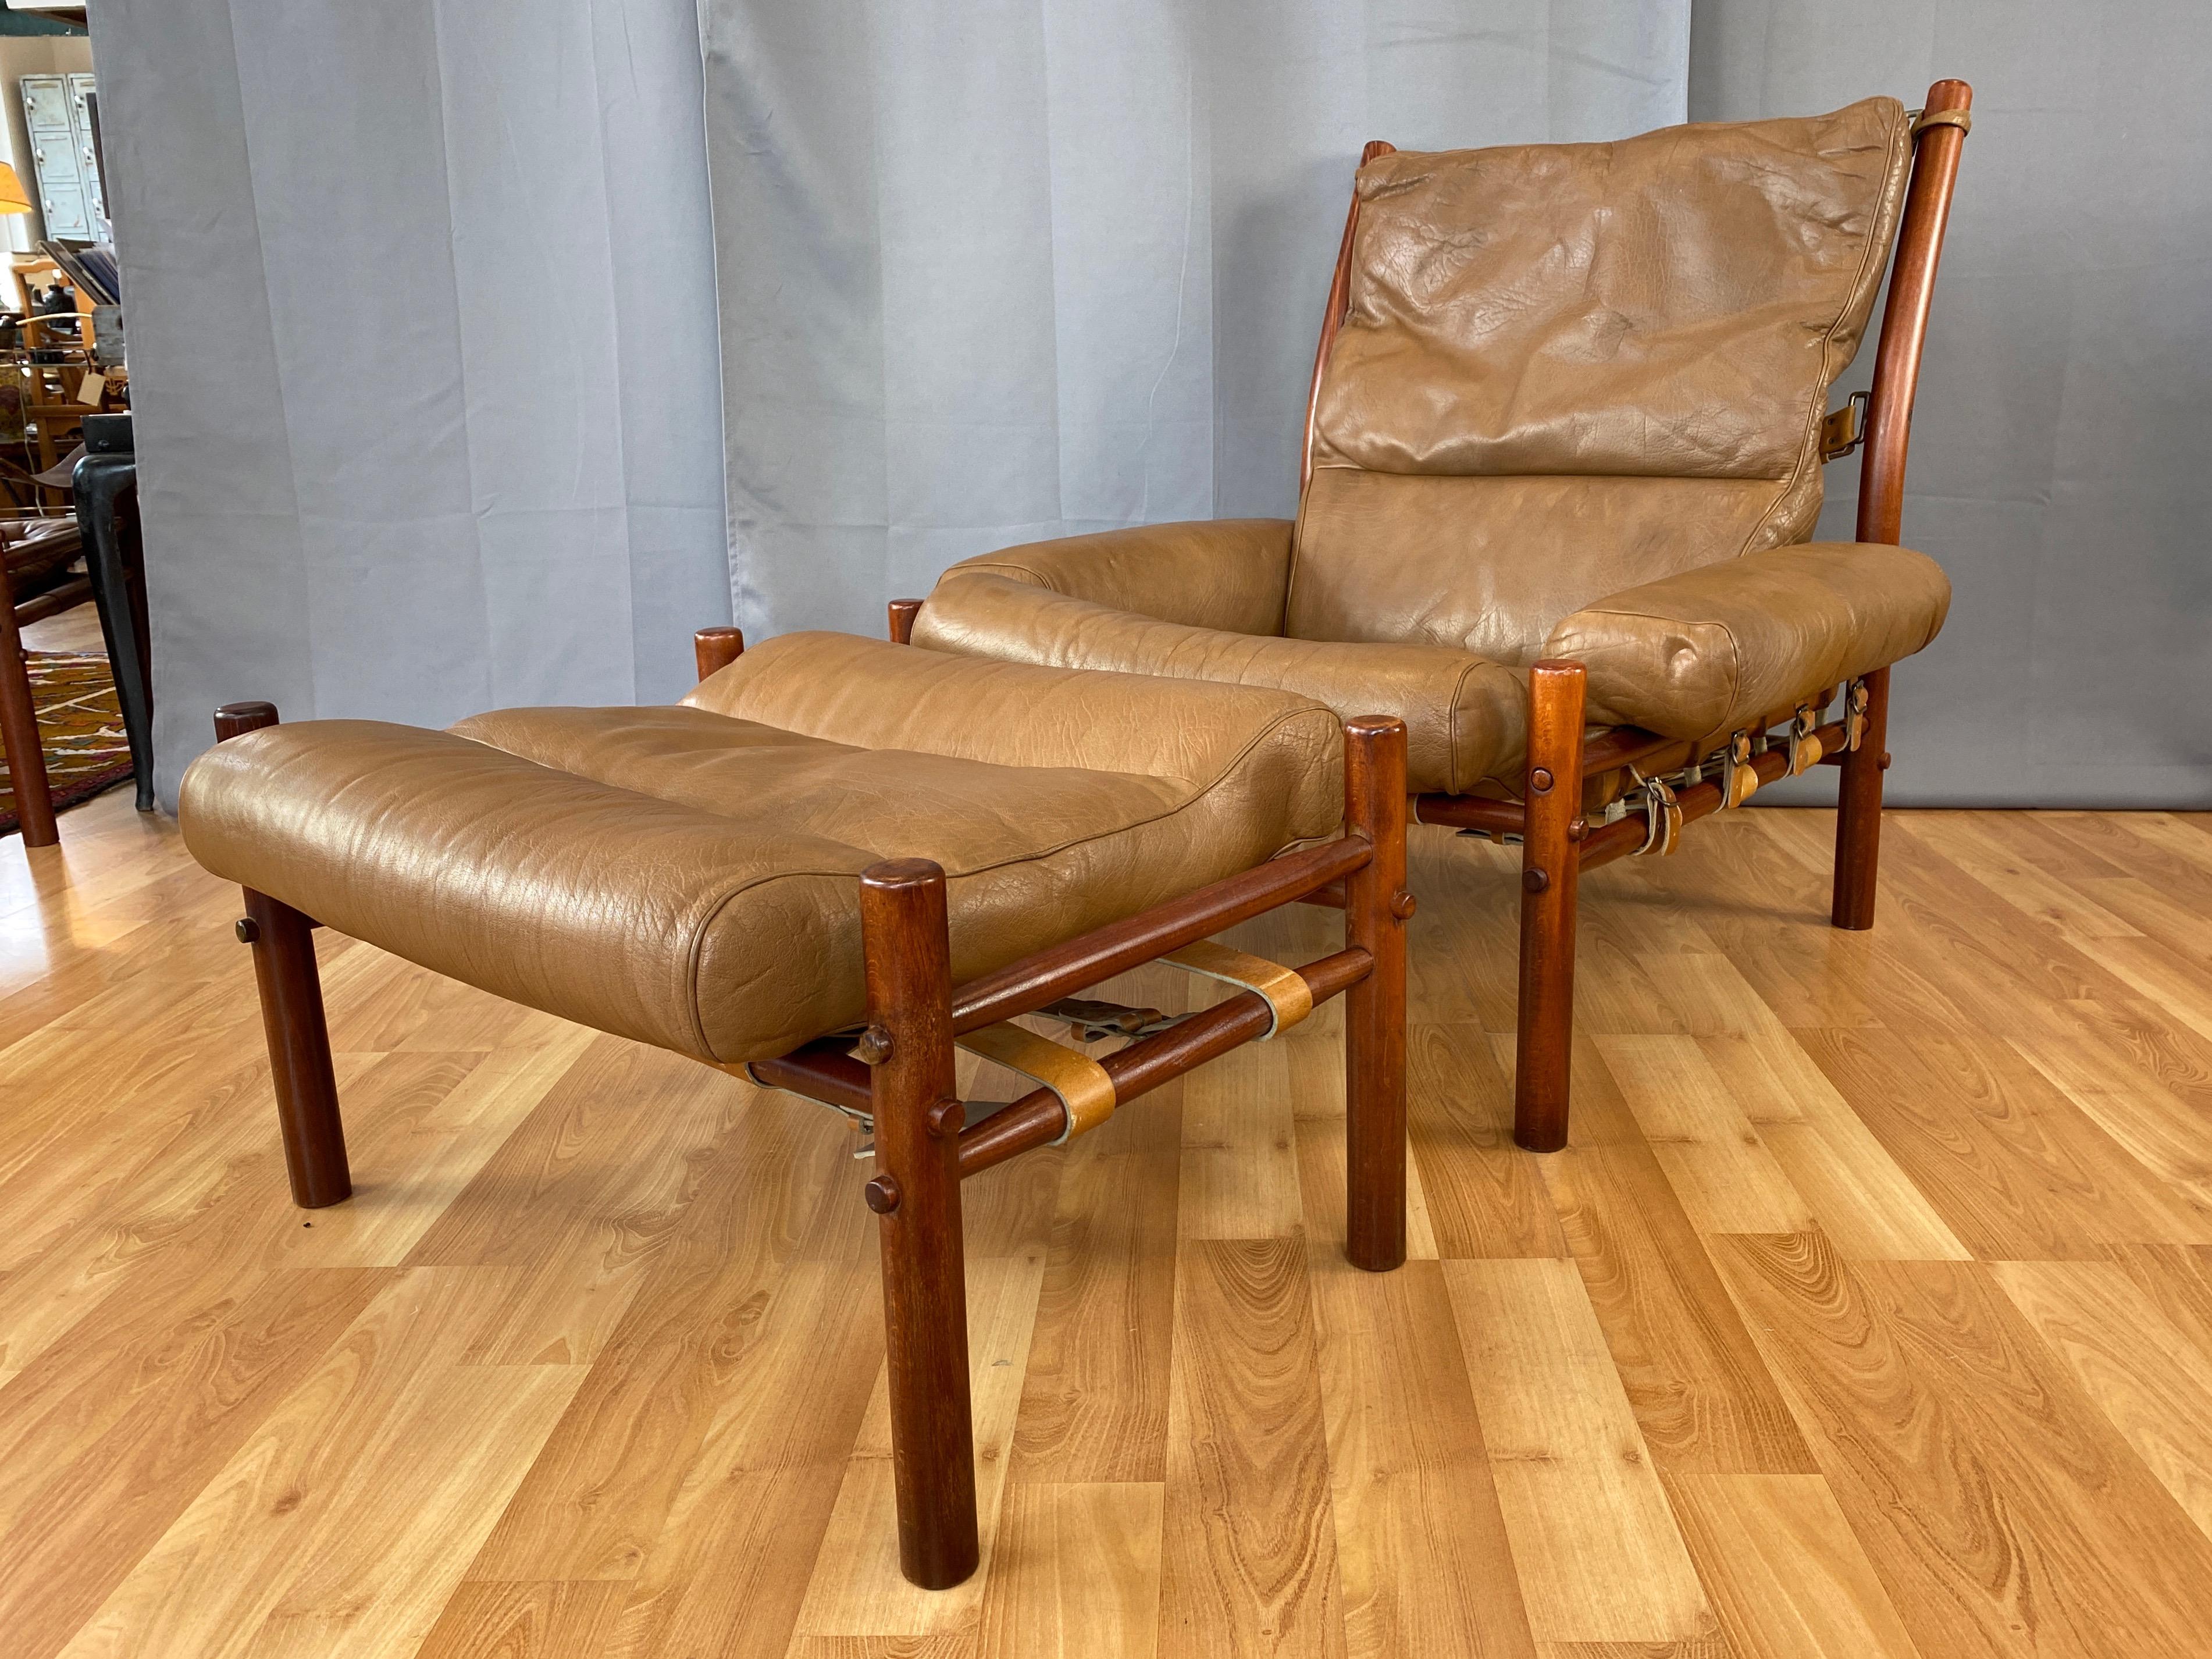 Scandinavian Modern Arne Norell Inca Lounge Chair & Ottoman in Teak-Colored Beech and Leather, 1970s